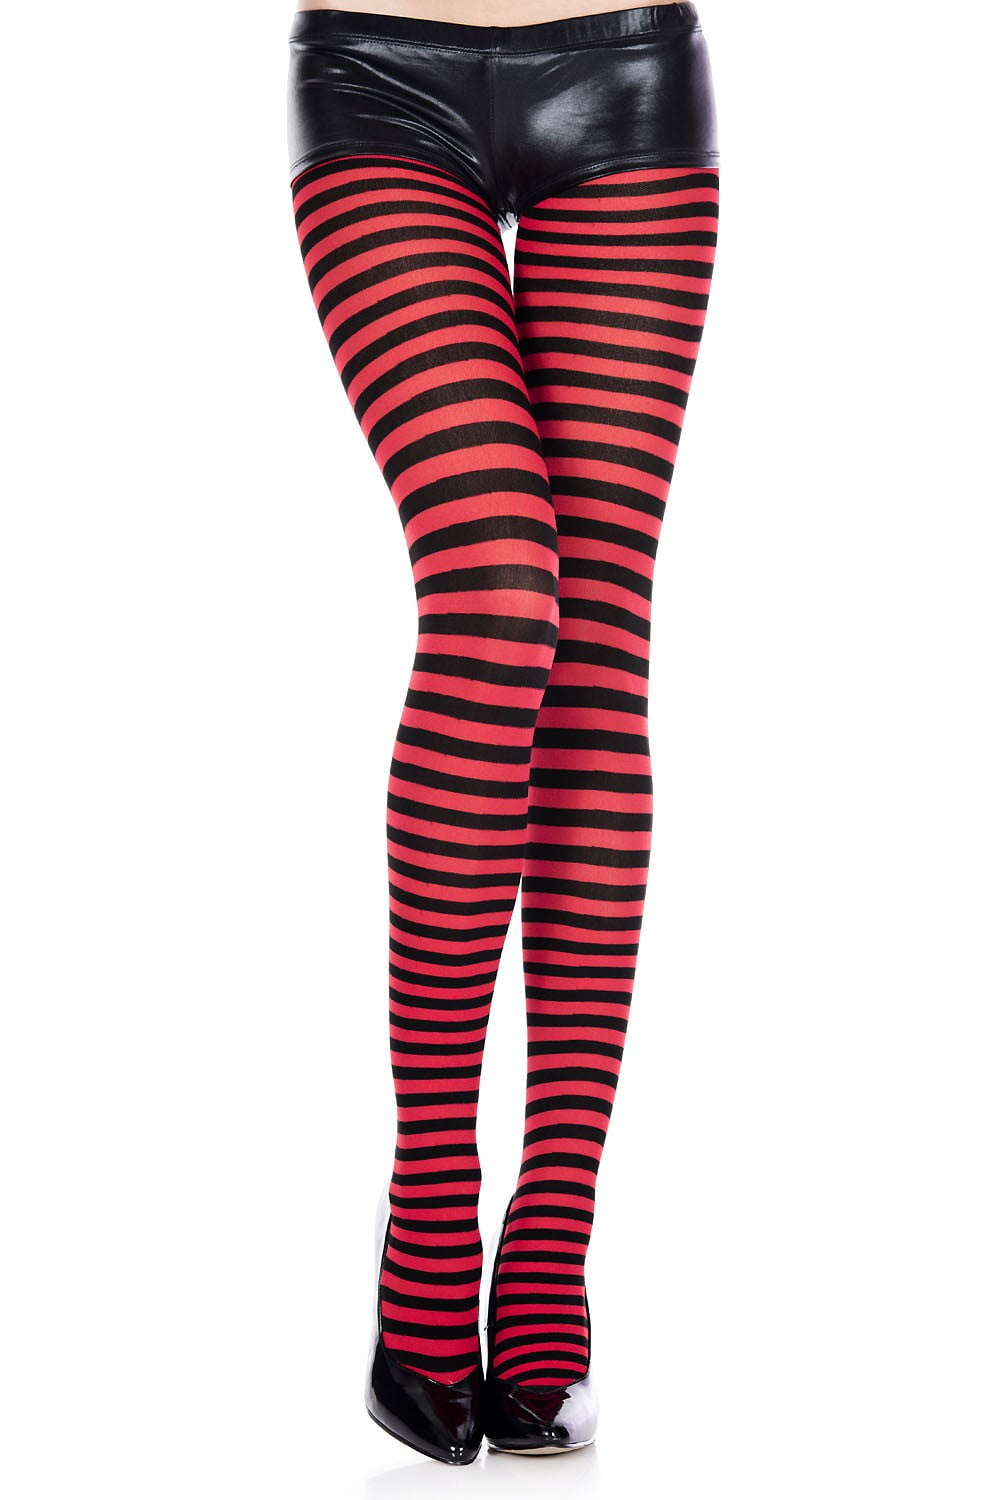 Striped Black and White Tights